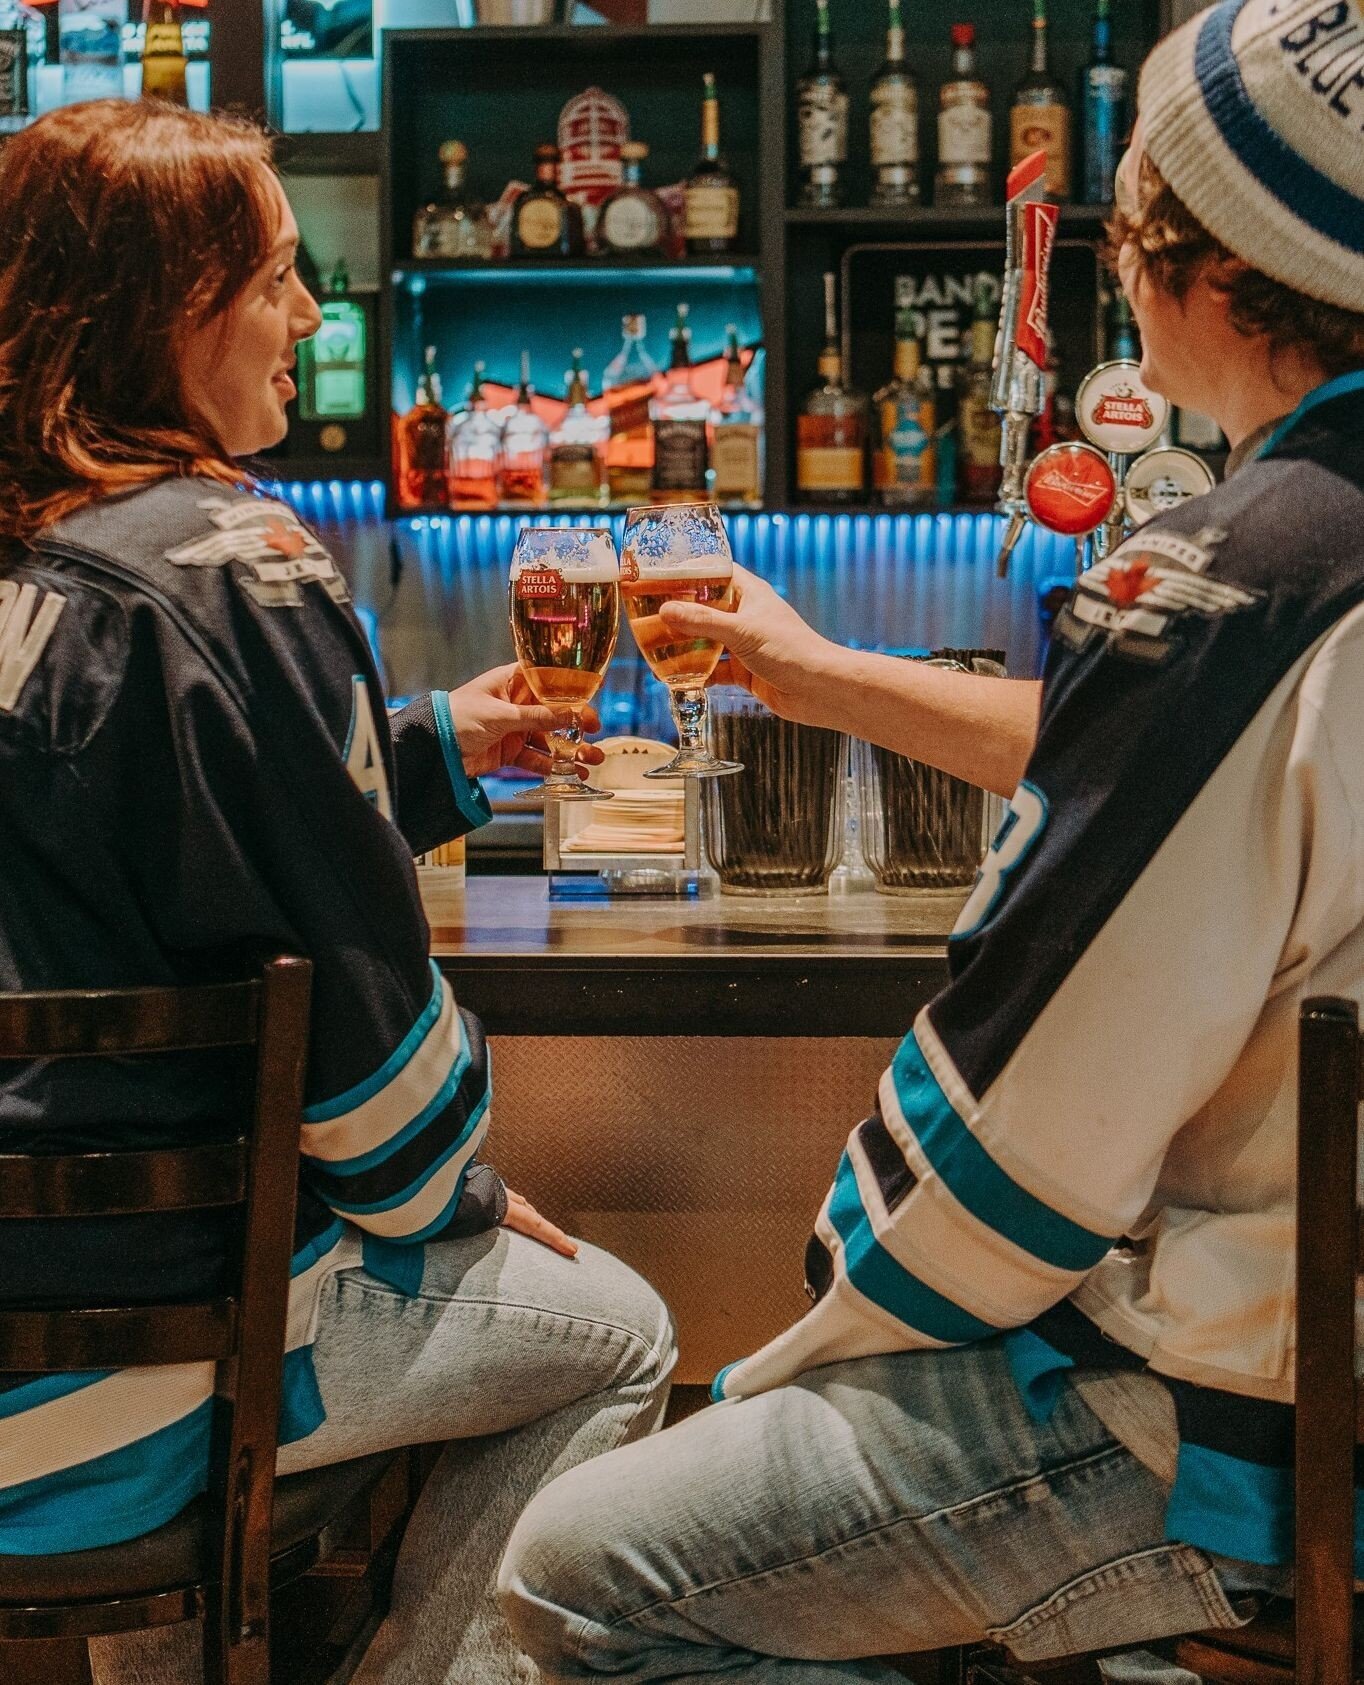 Jets vs Blackhawks tonight. Game day specials, big screens, and it all starts here. ⁠
⁠
Not to mention: Festival du Voyageur is happening around these parts all weekend! Live music Saturday 8:30 - Late⁠
🎻🏒🍺⁠
.⁠
.⁠
.⁠
.⁠
.⁠
#winnipeg #winnipegevent